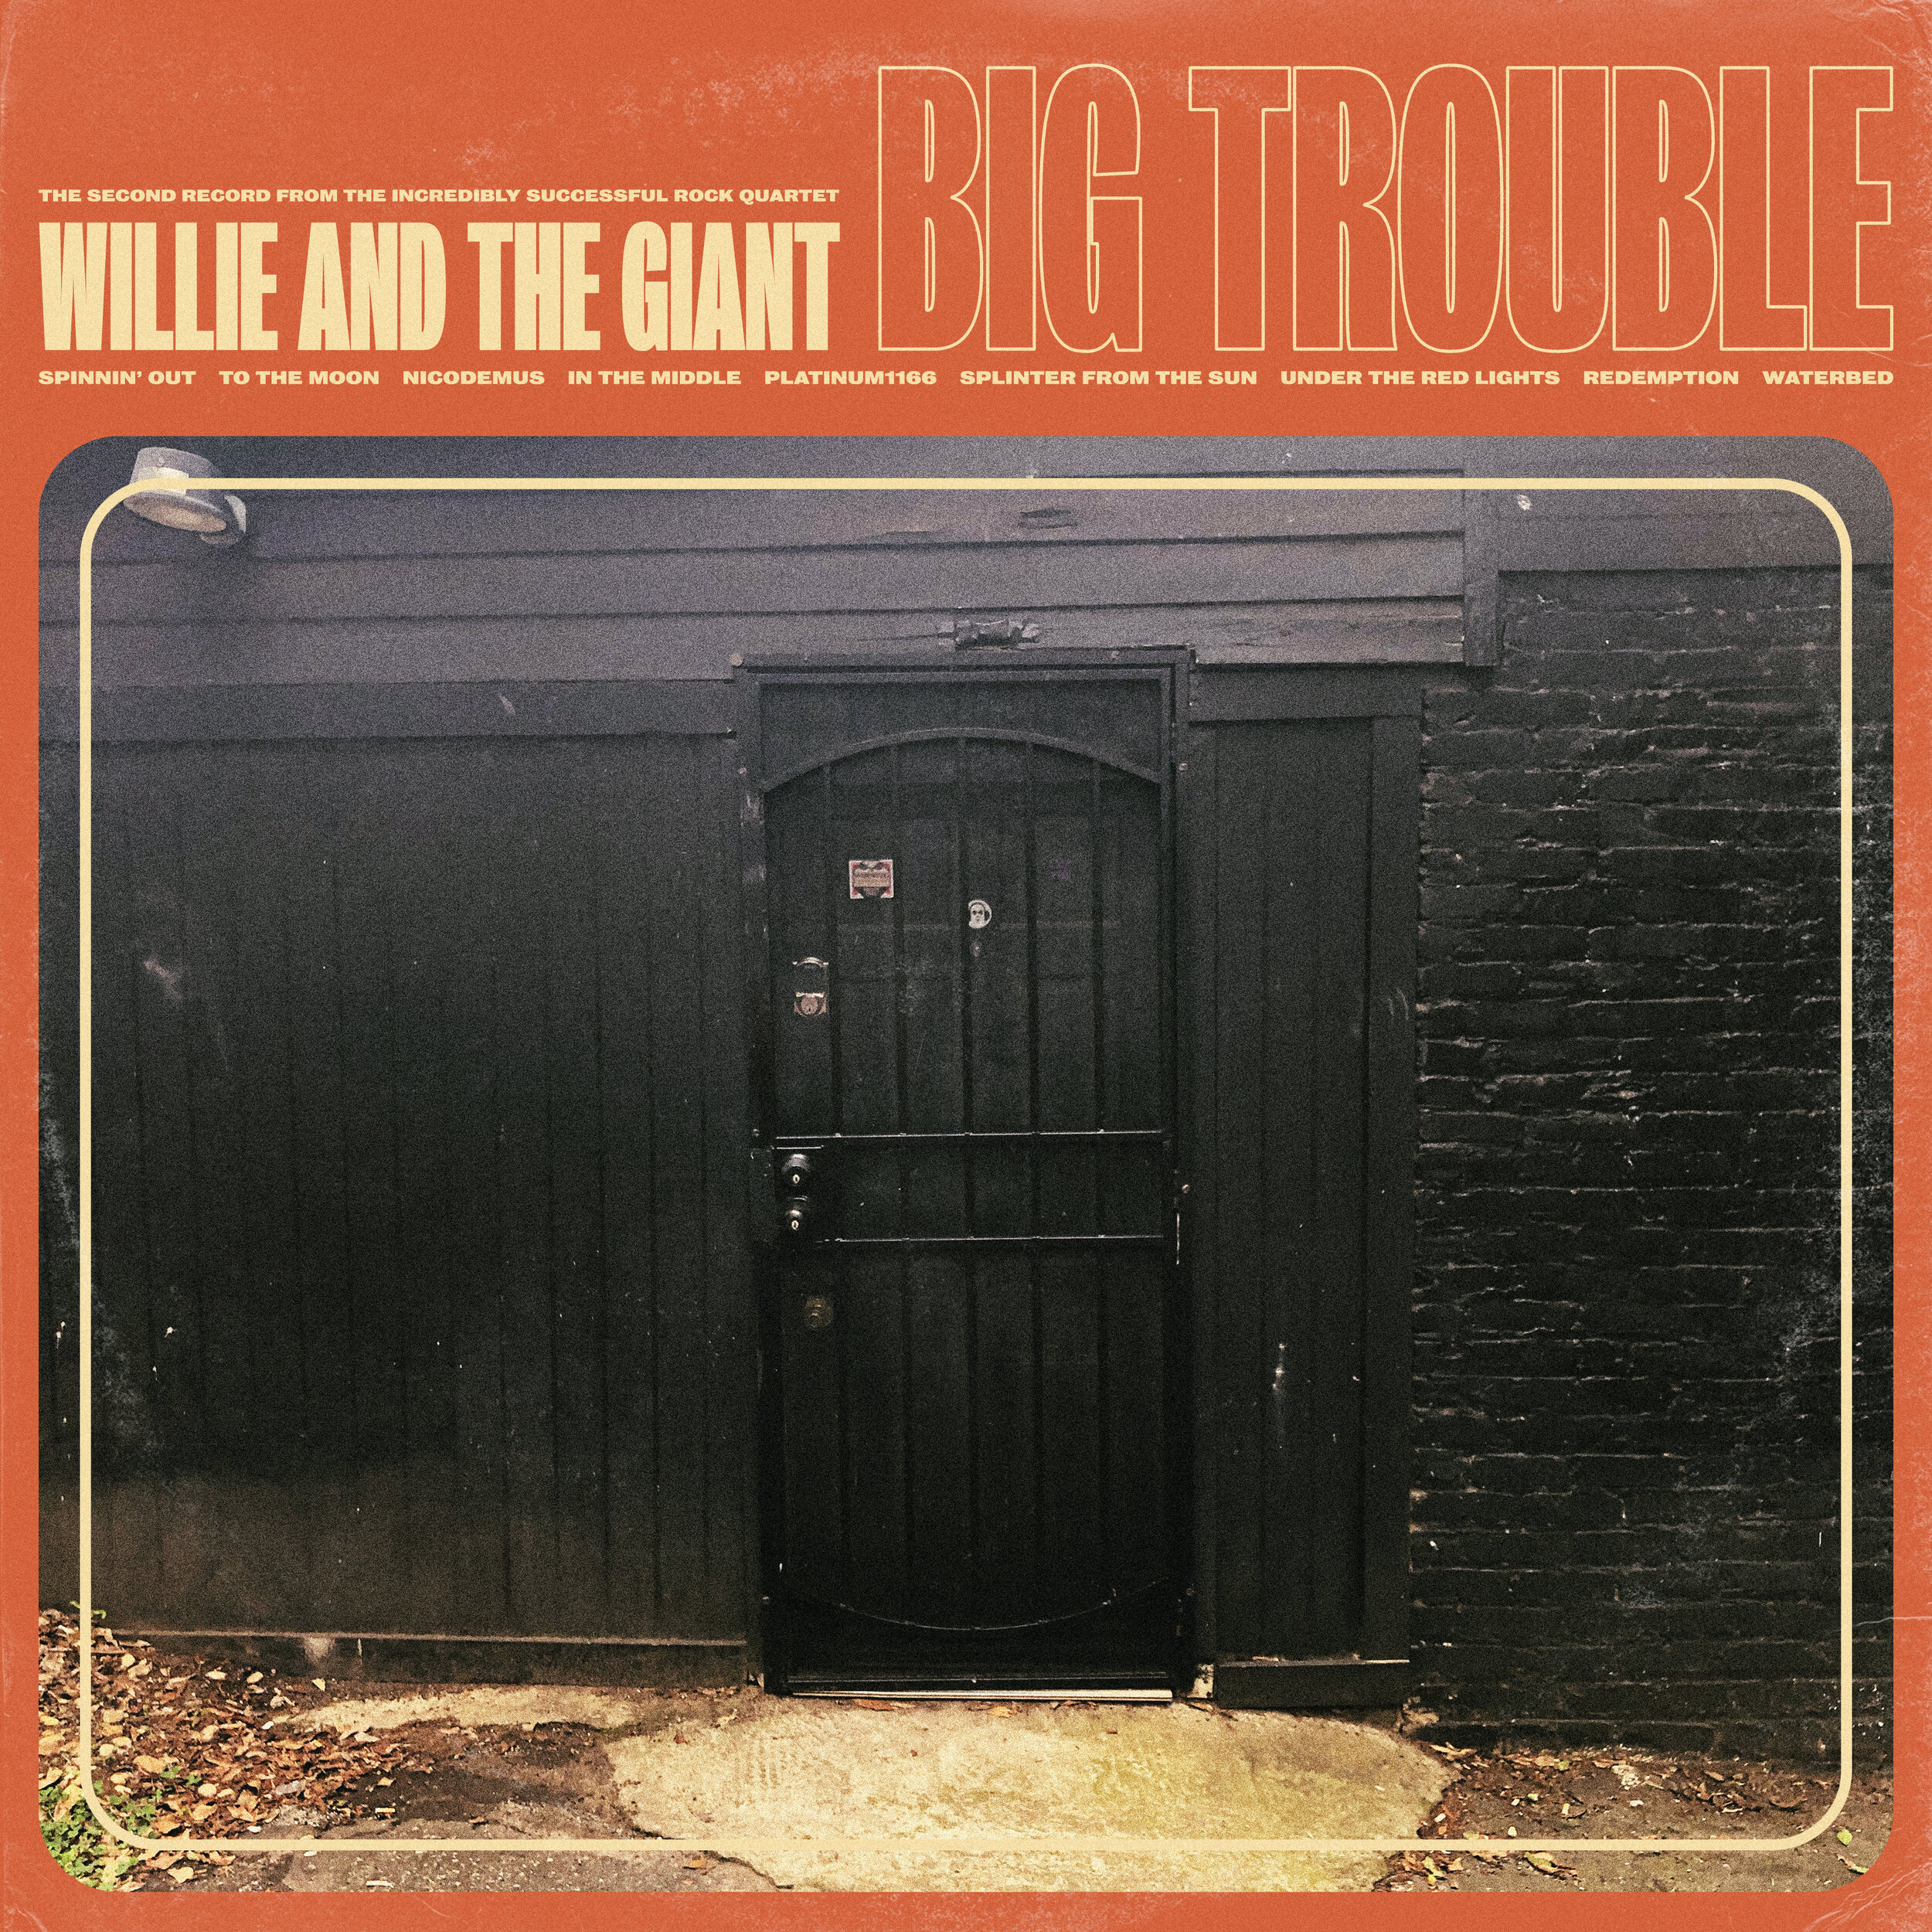 willie and the giant big trouble artwork FINAL large.jpg